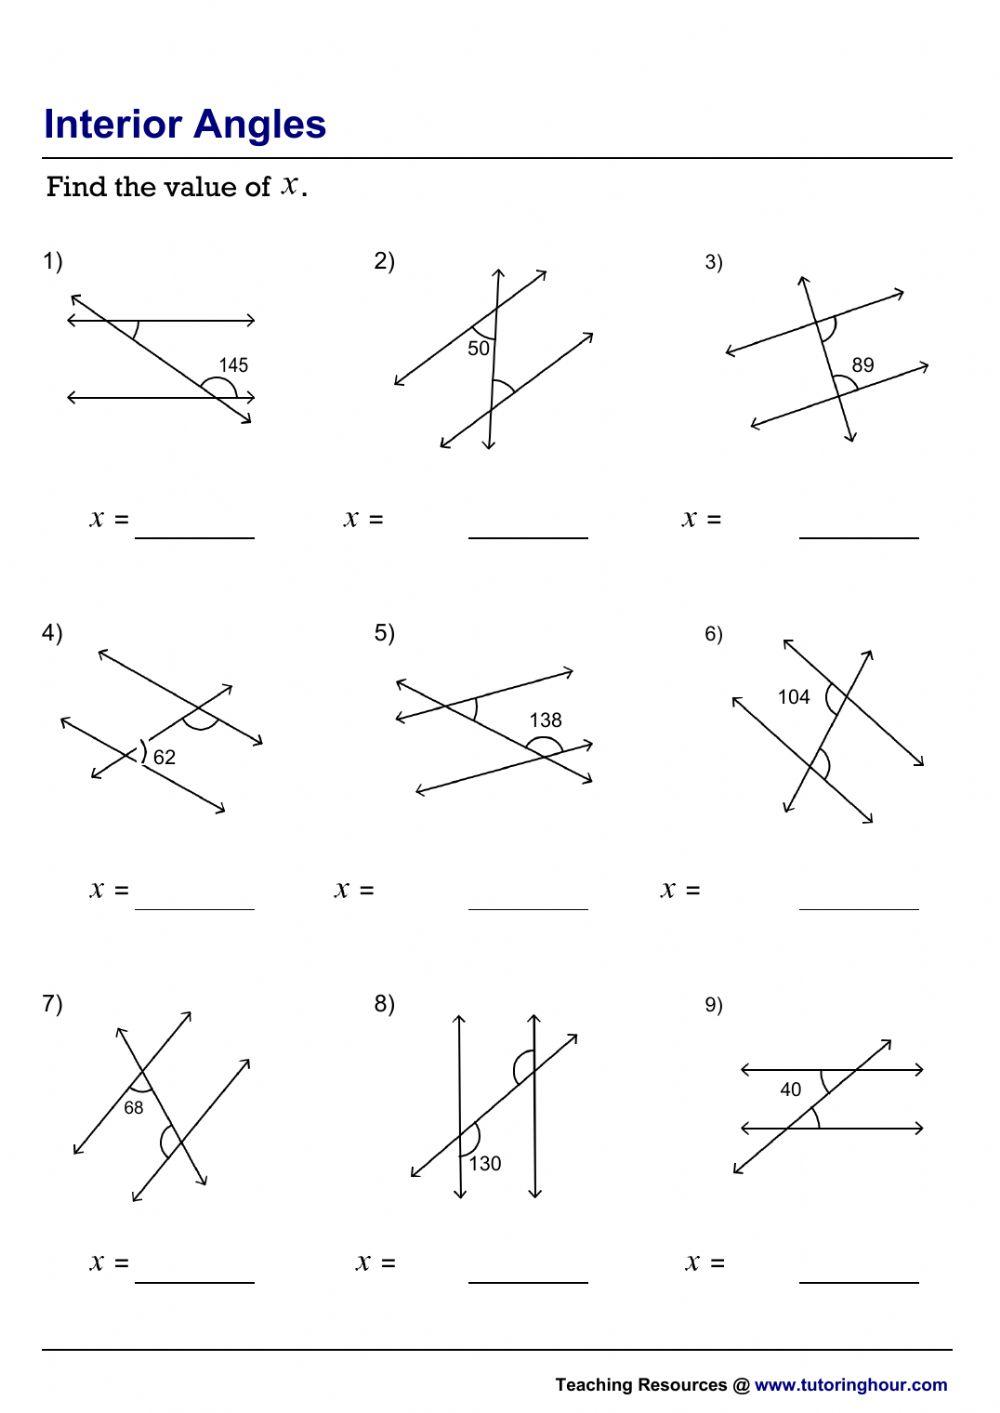 Co Interior And Alternate Angles Online Exercise For Live Worksheets